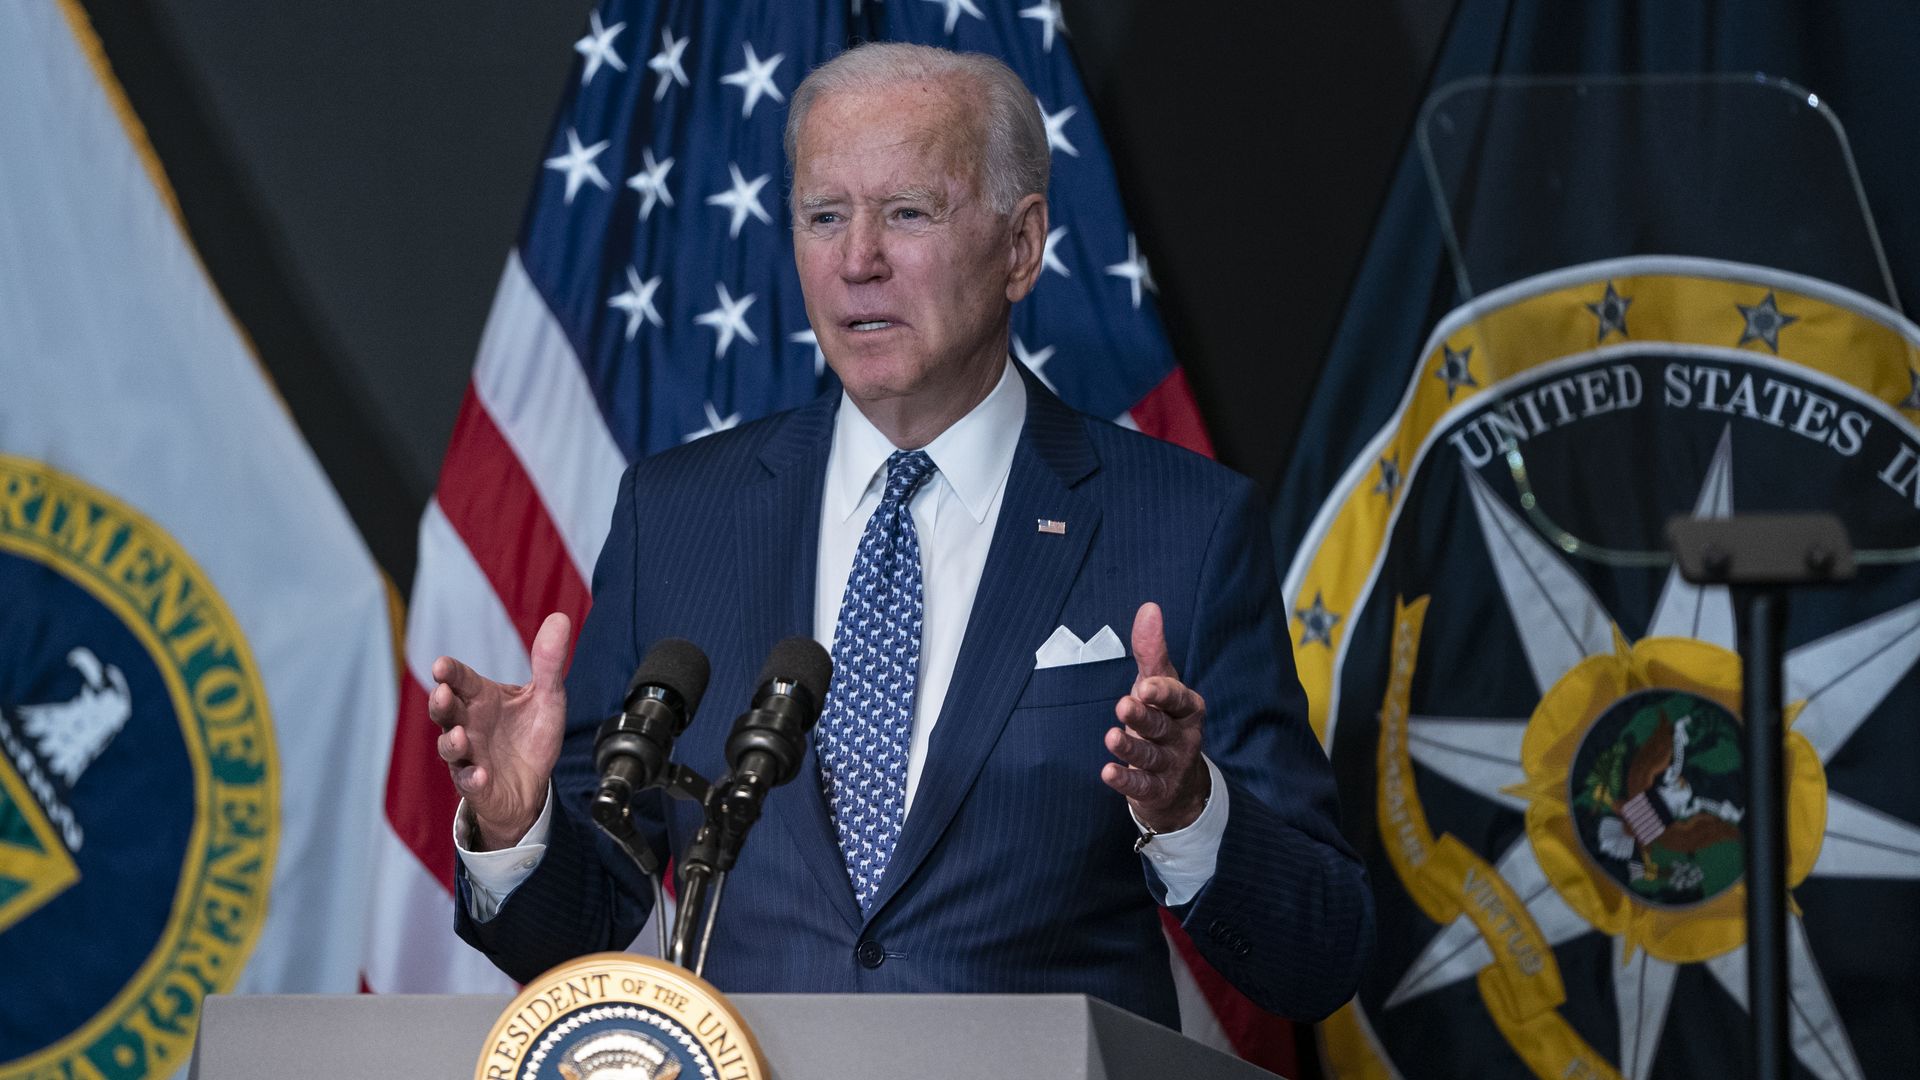 Photo of Joe Biden speaking from a podium and gesturing with his hands